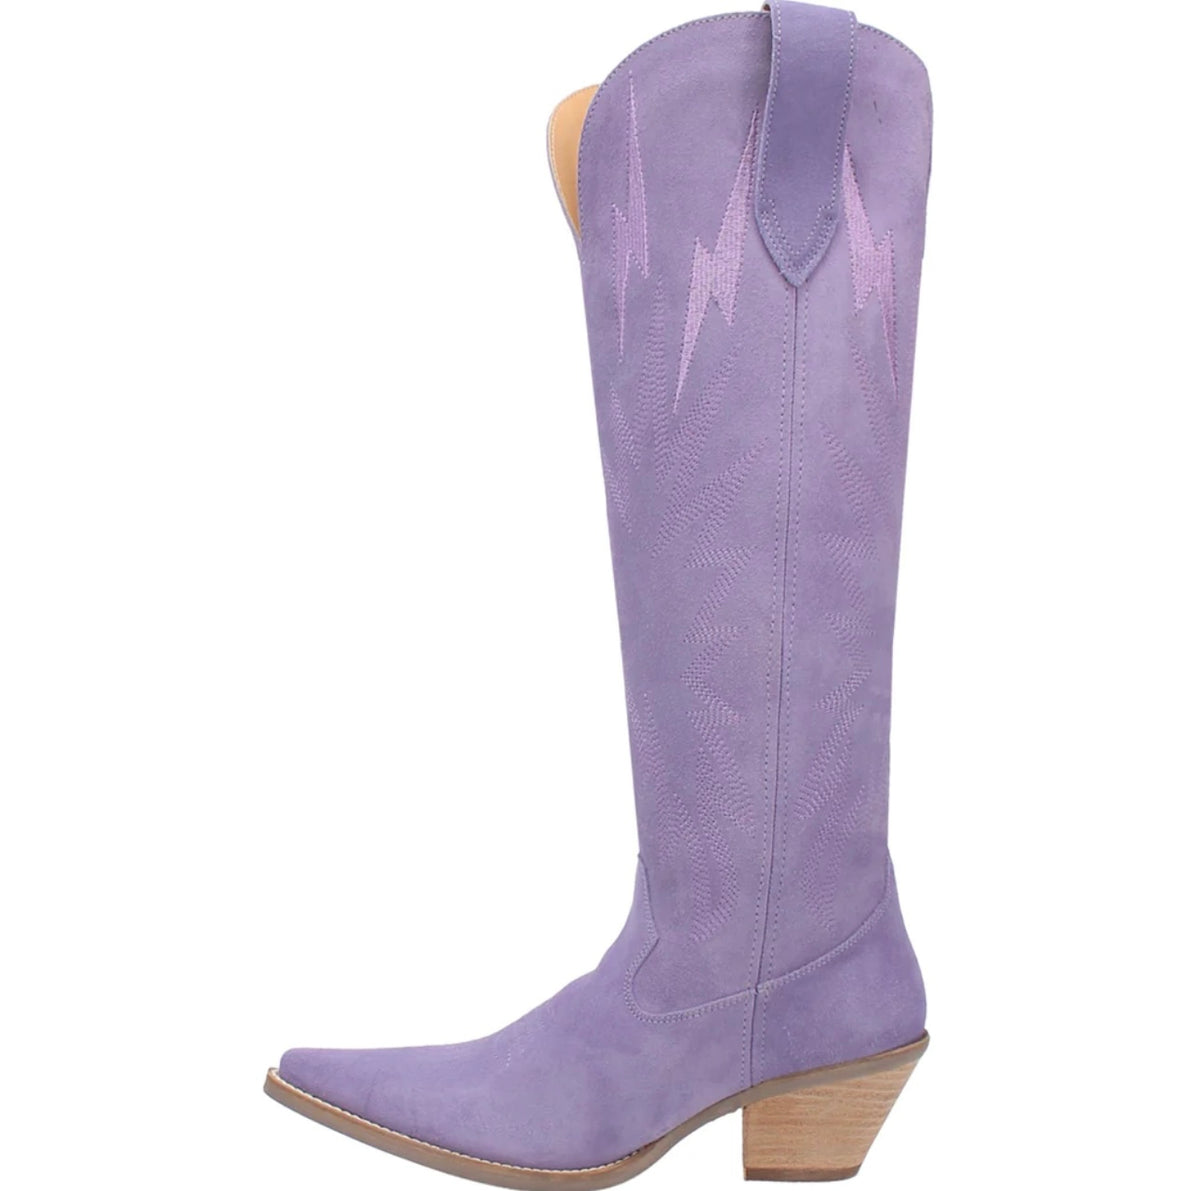 Thunder Road Leather Boot in Periwinkle